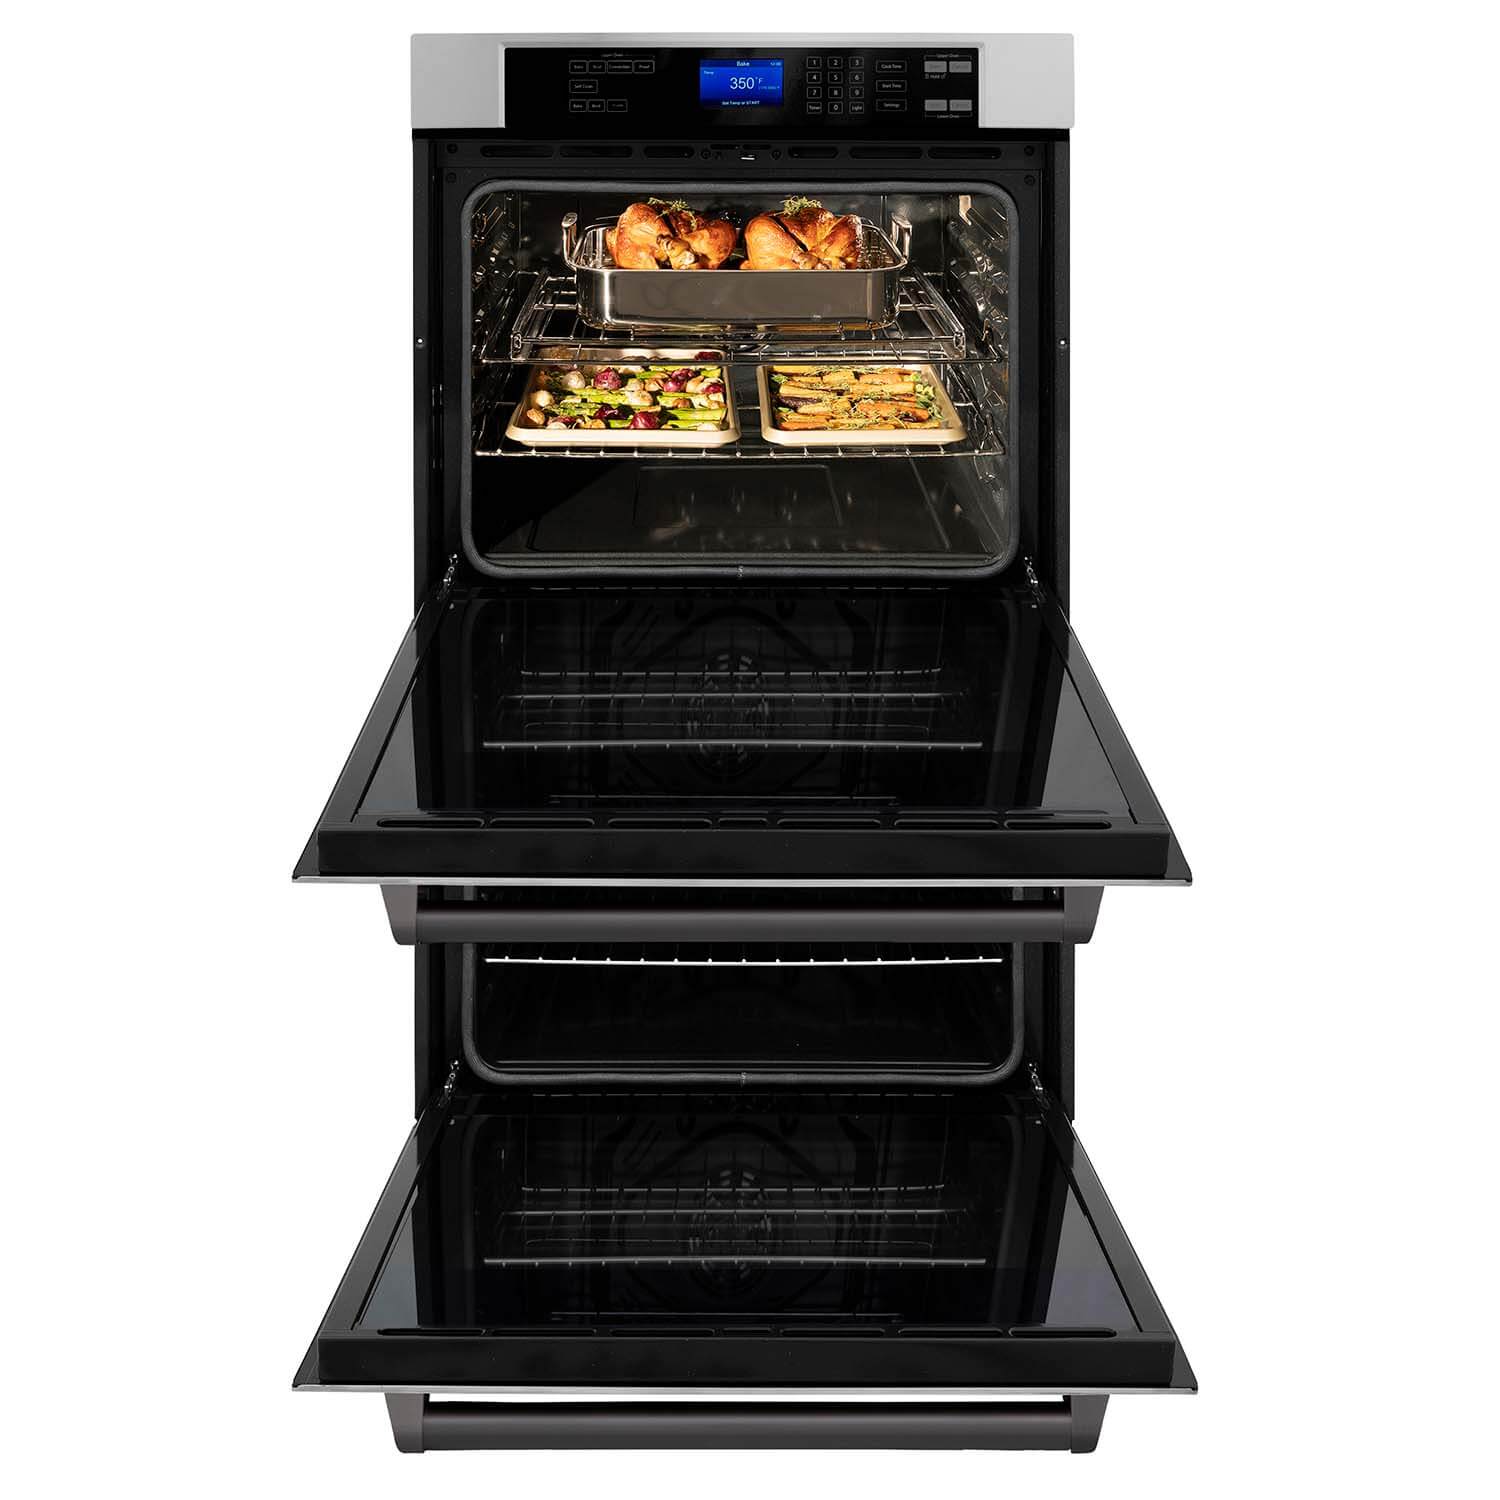 ZLINE Autograph Edition 30 in. Electric Double Wall Oven with Self Clean and True Convection in Stainless Steel and Matte Black Accents (AWDZ-30-MB) front, oven open.